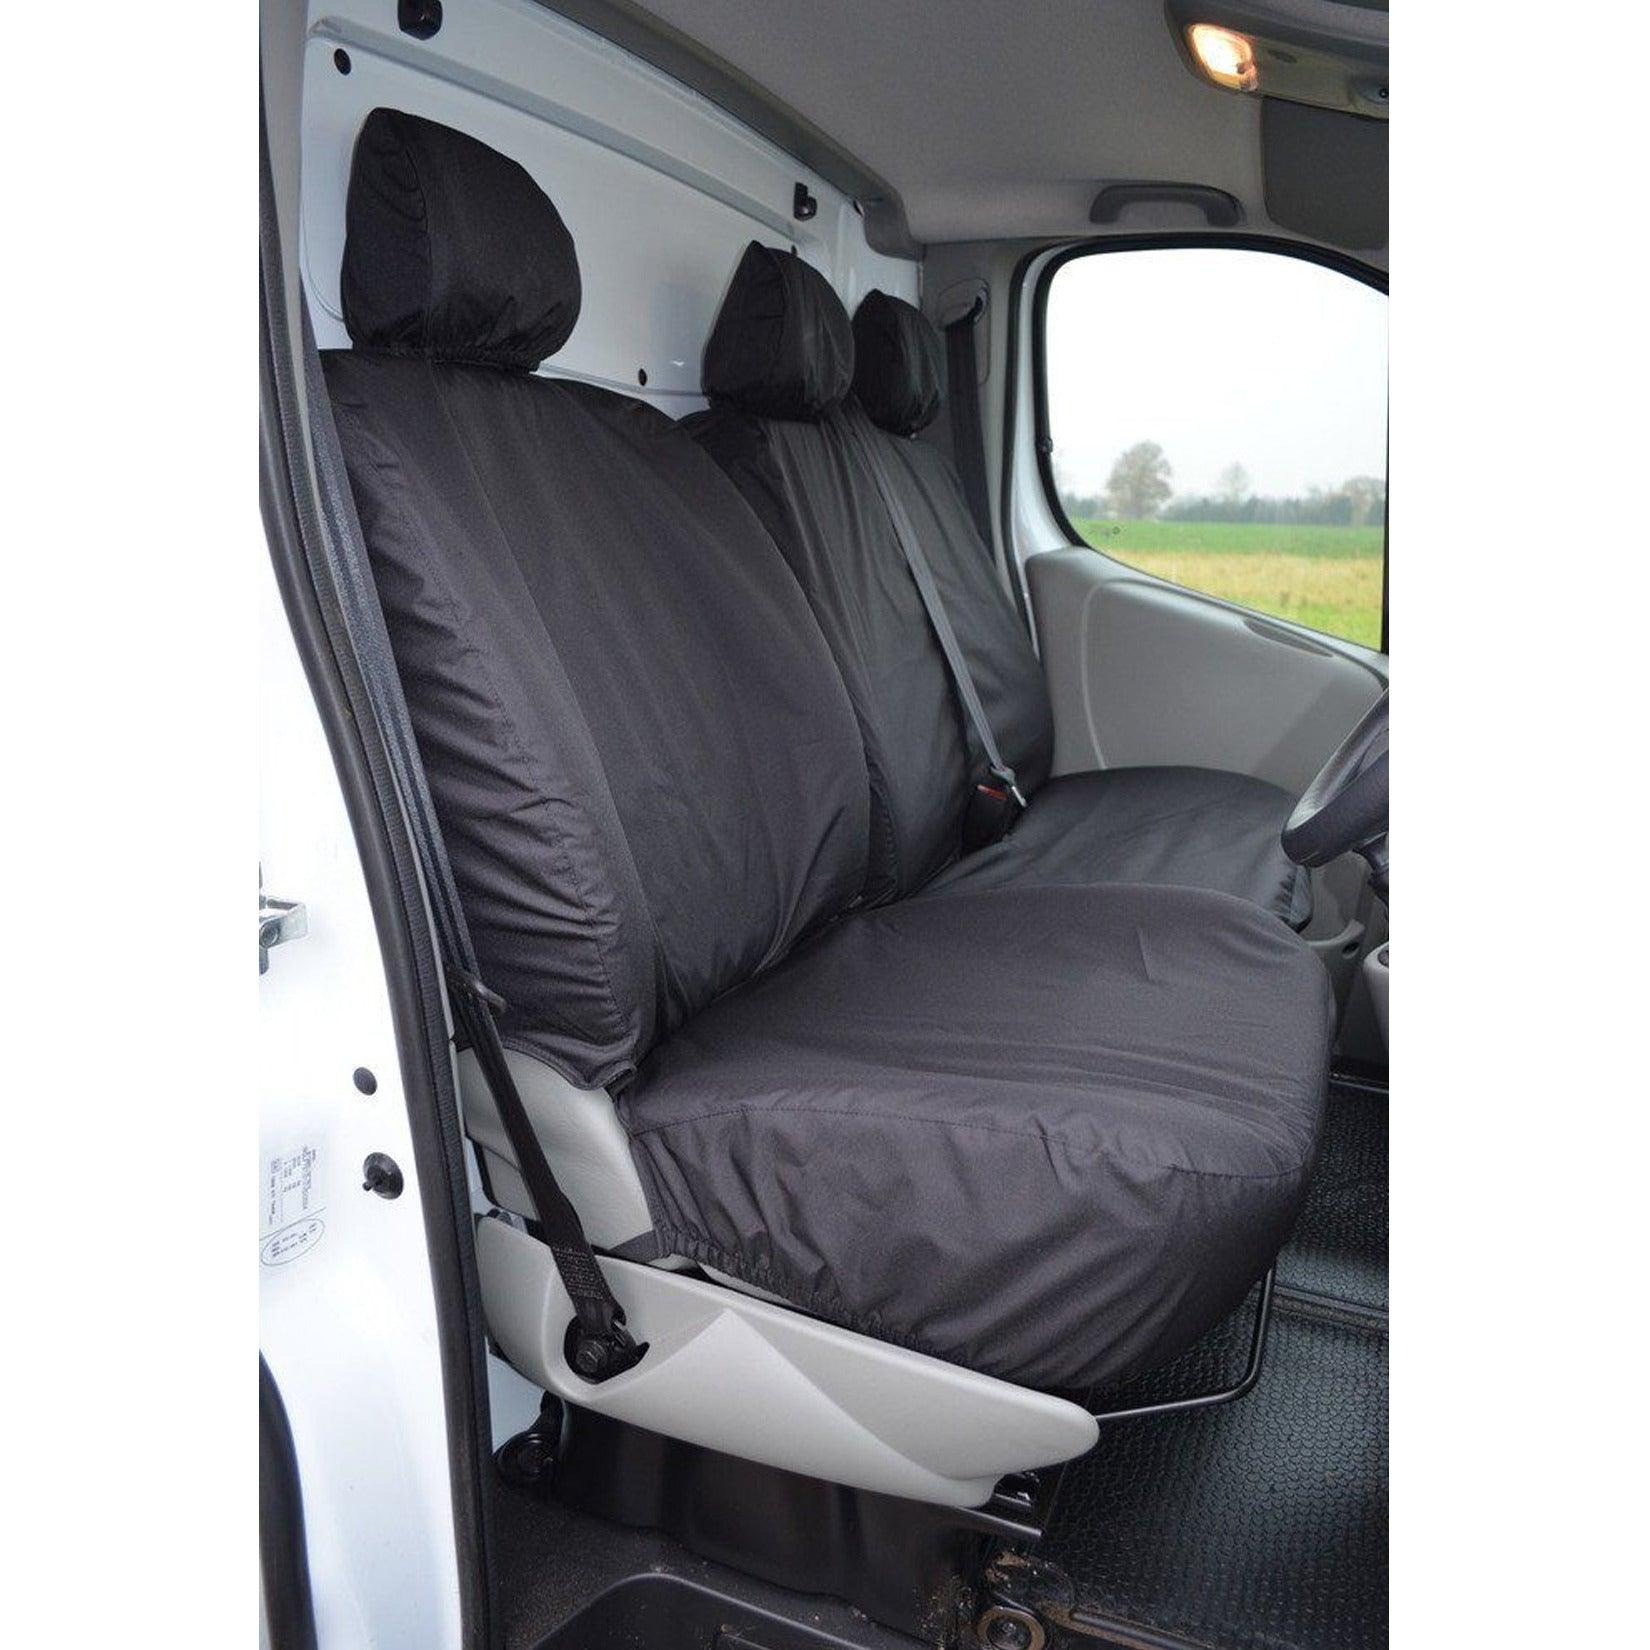 RENAULT TRAFIC 2006-2014 DRIVER (NO ARMREST) AND FRONT DOUBLE PASSENGER SEAT COVERS - BLACK - Storm Xccessories2